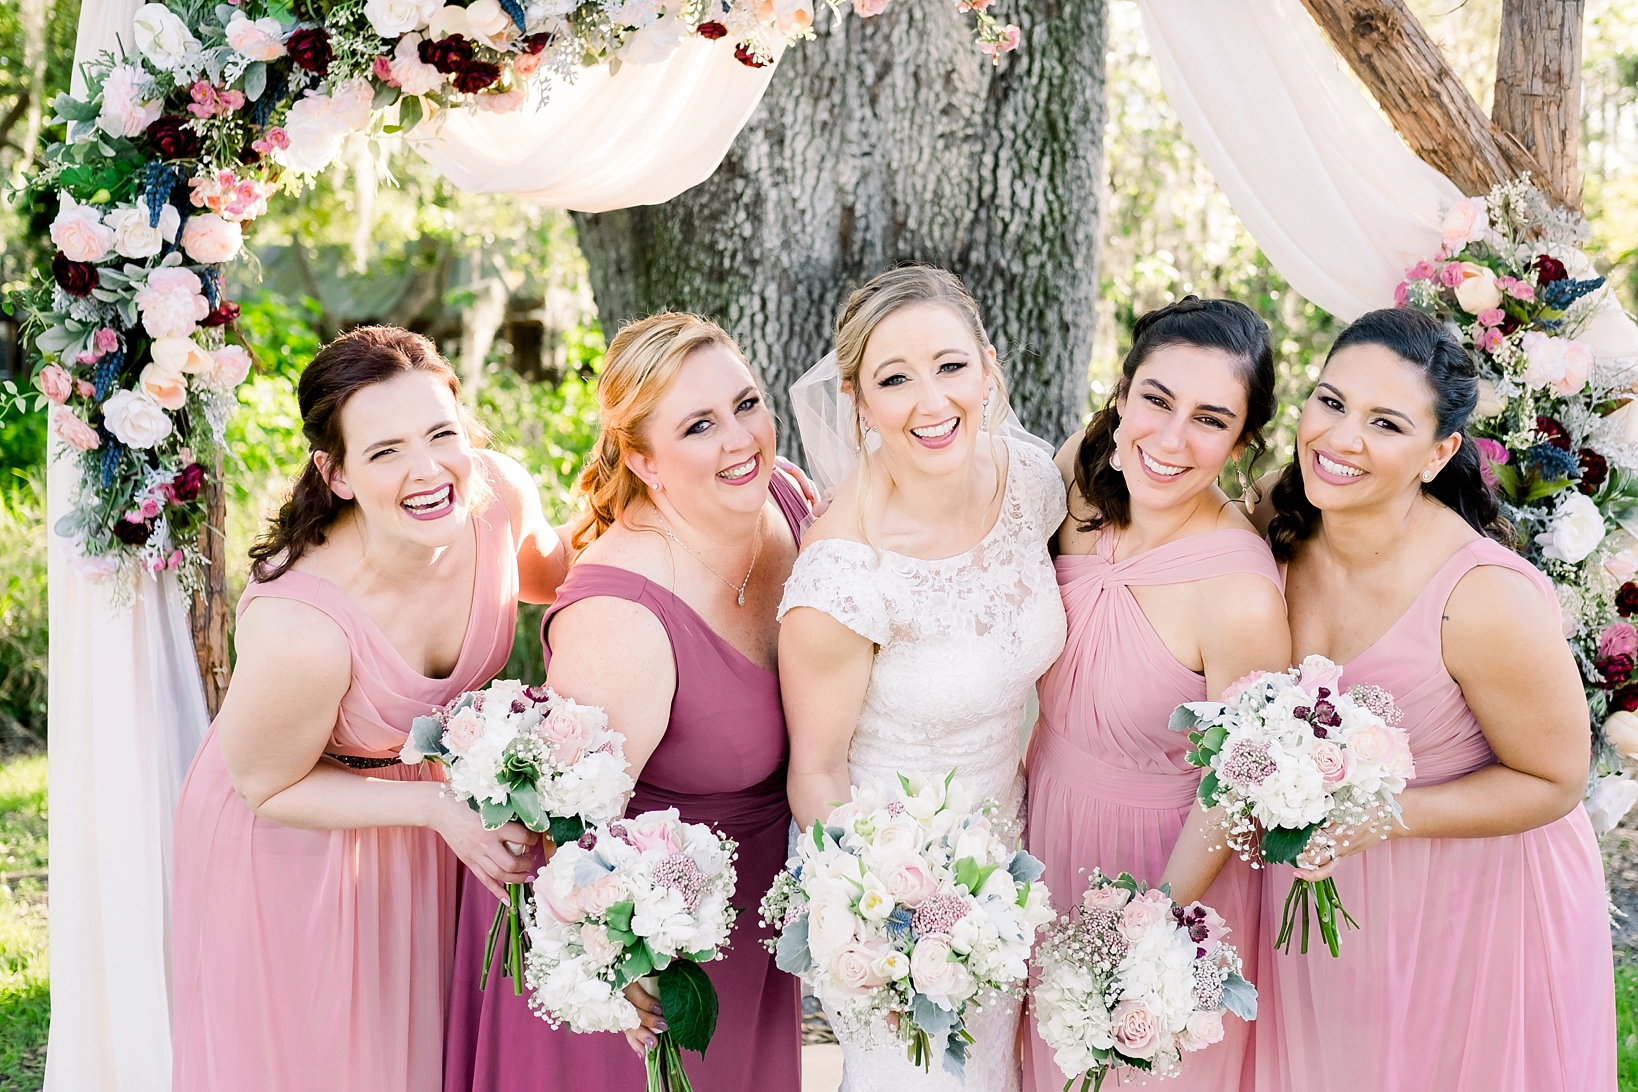 Bride and her Bridesmaids pose under the wedding arch while holding their florals